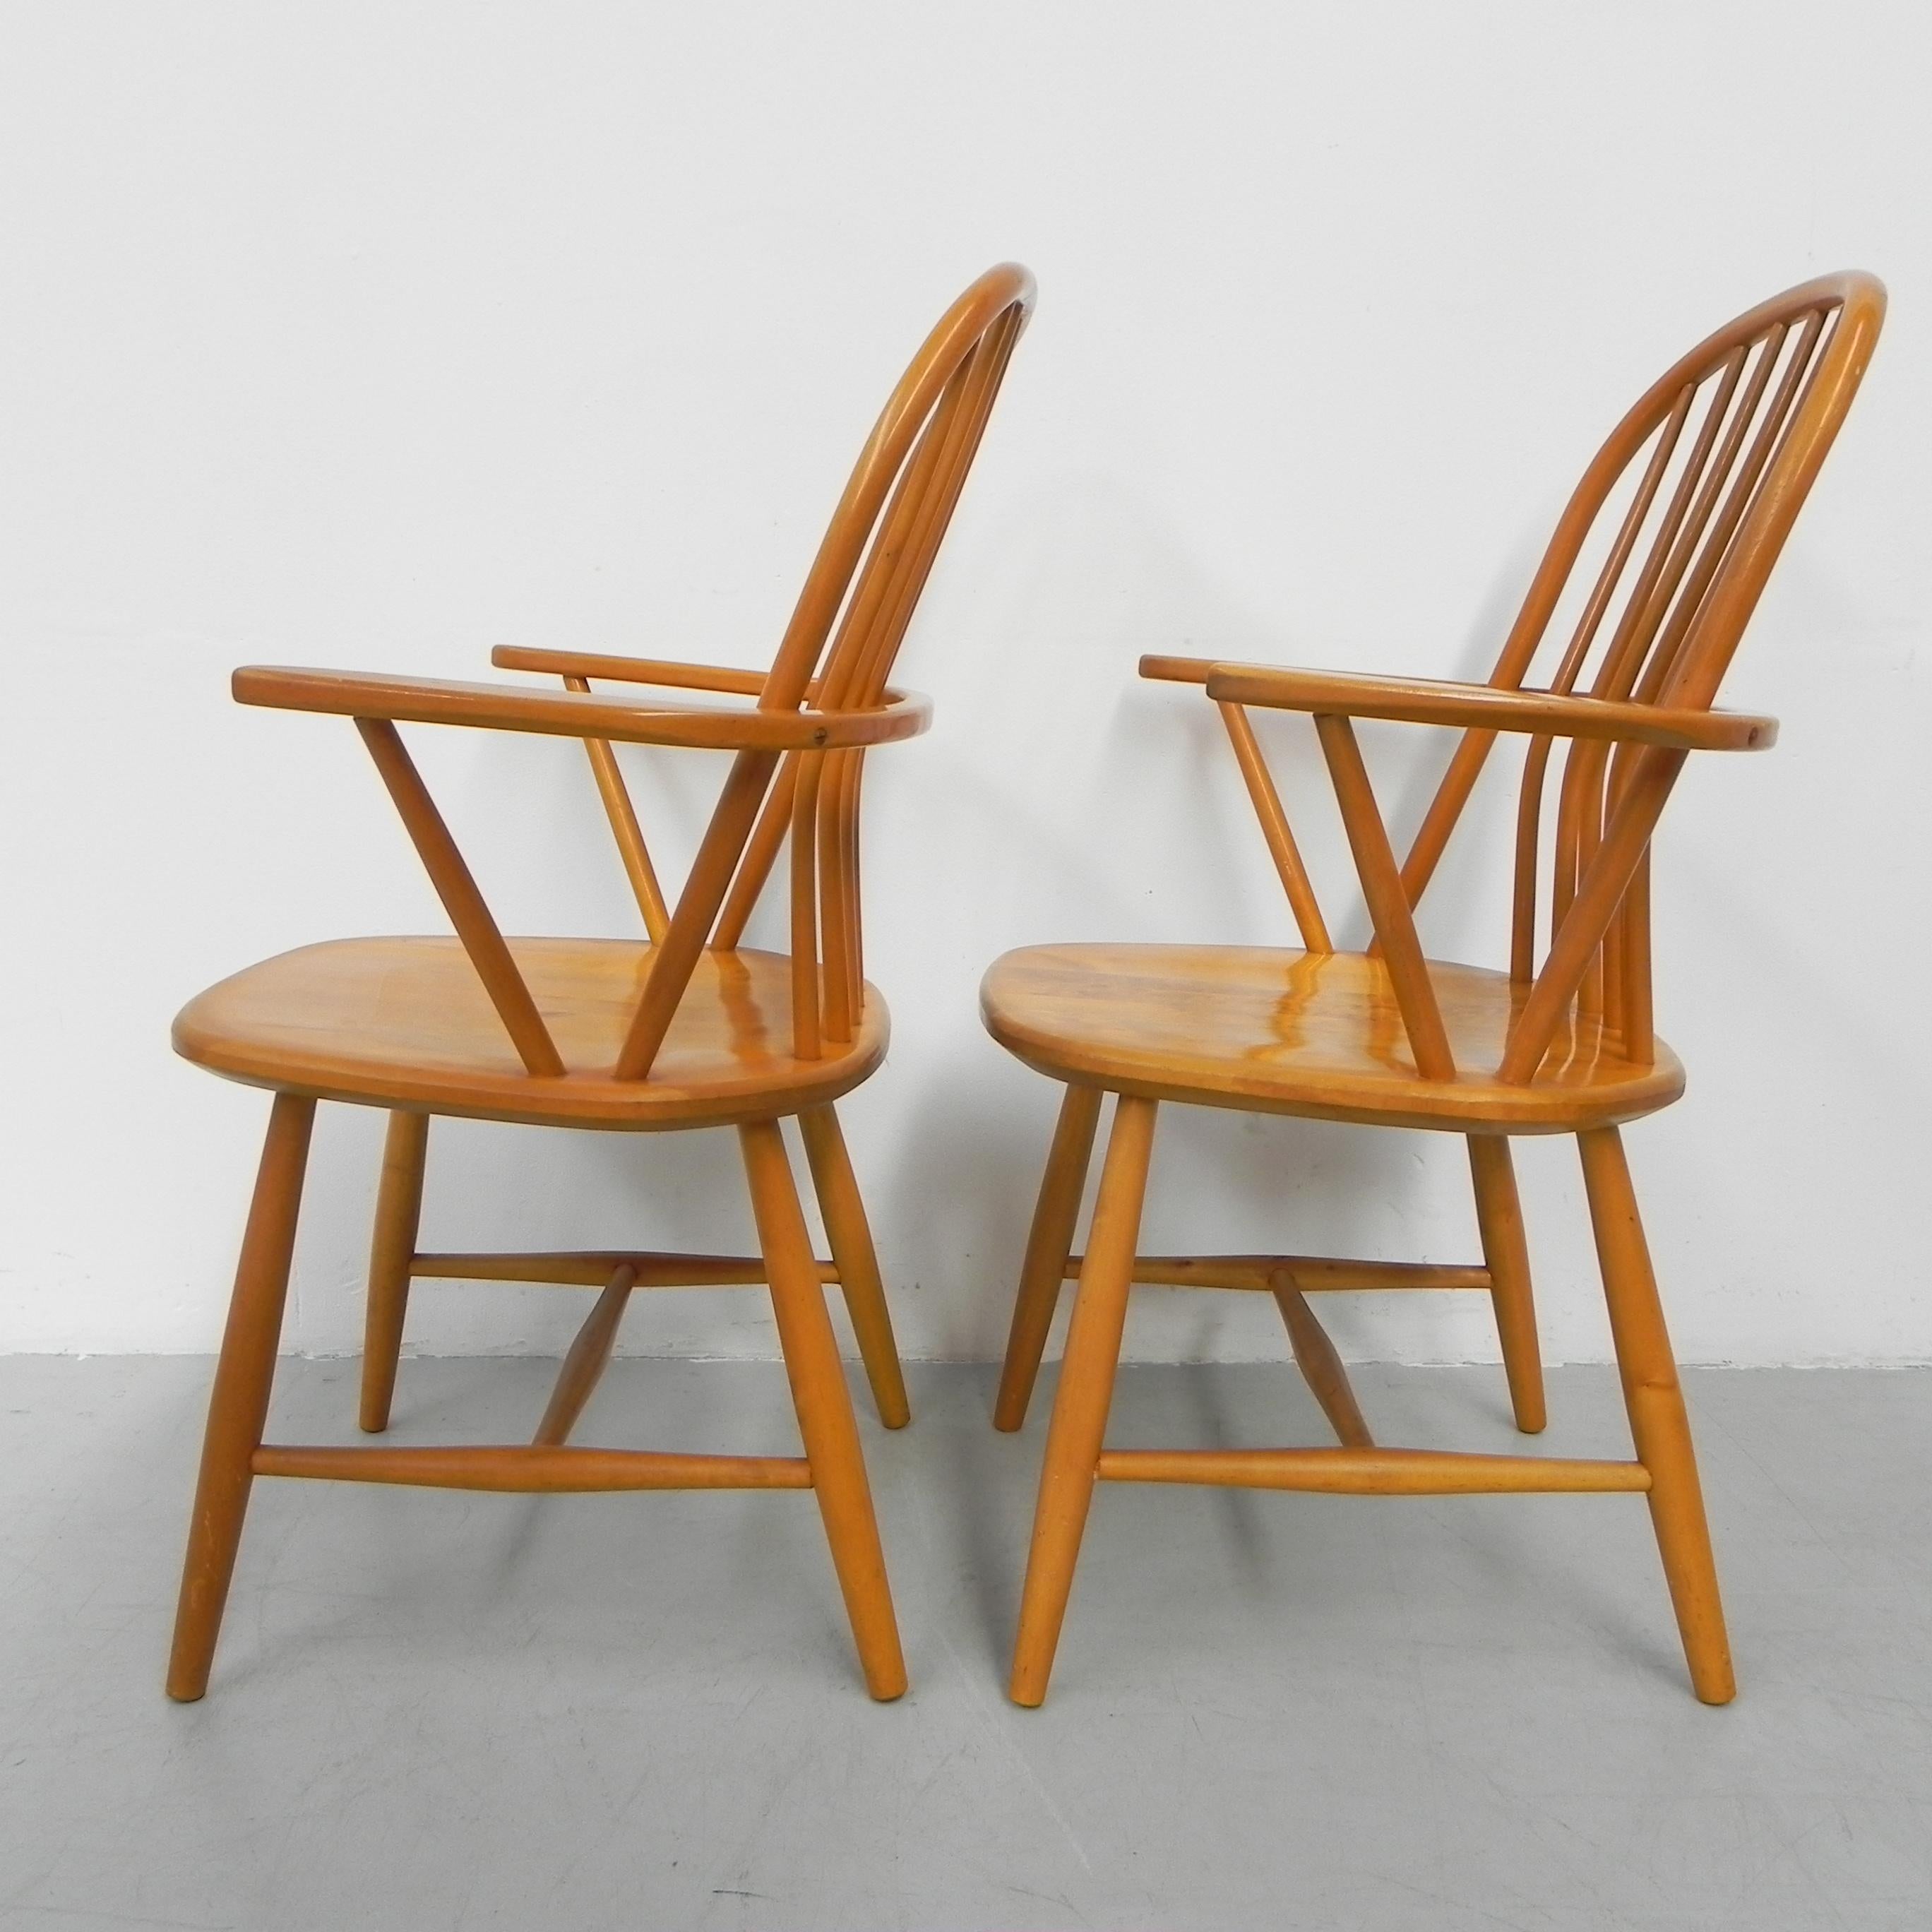 Birch Set of 2 armchairs, bar chairs, Akerblom Chair For Sale